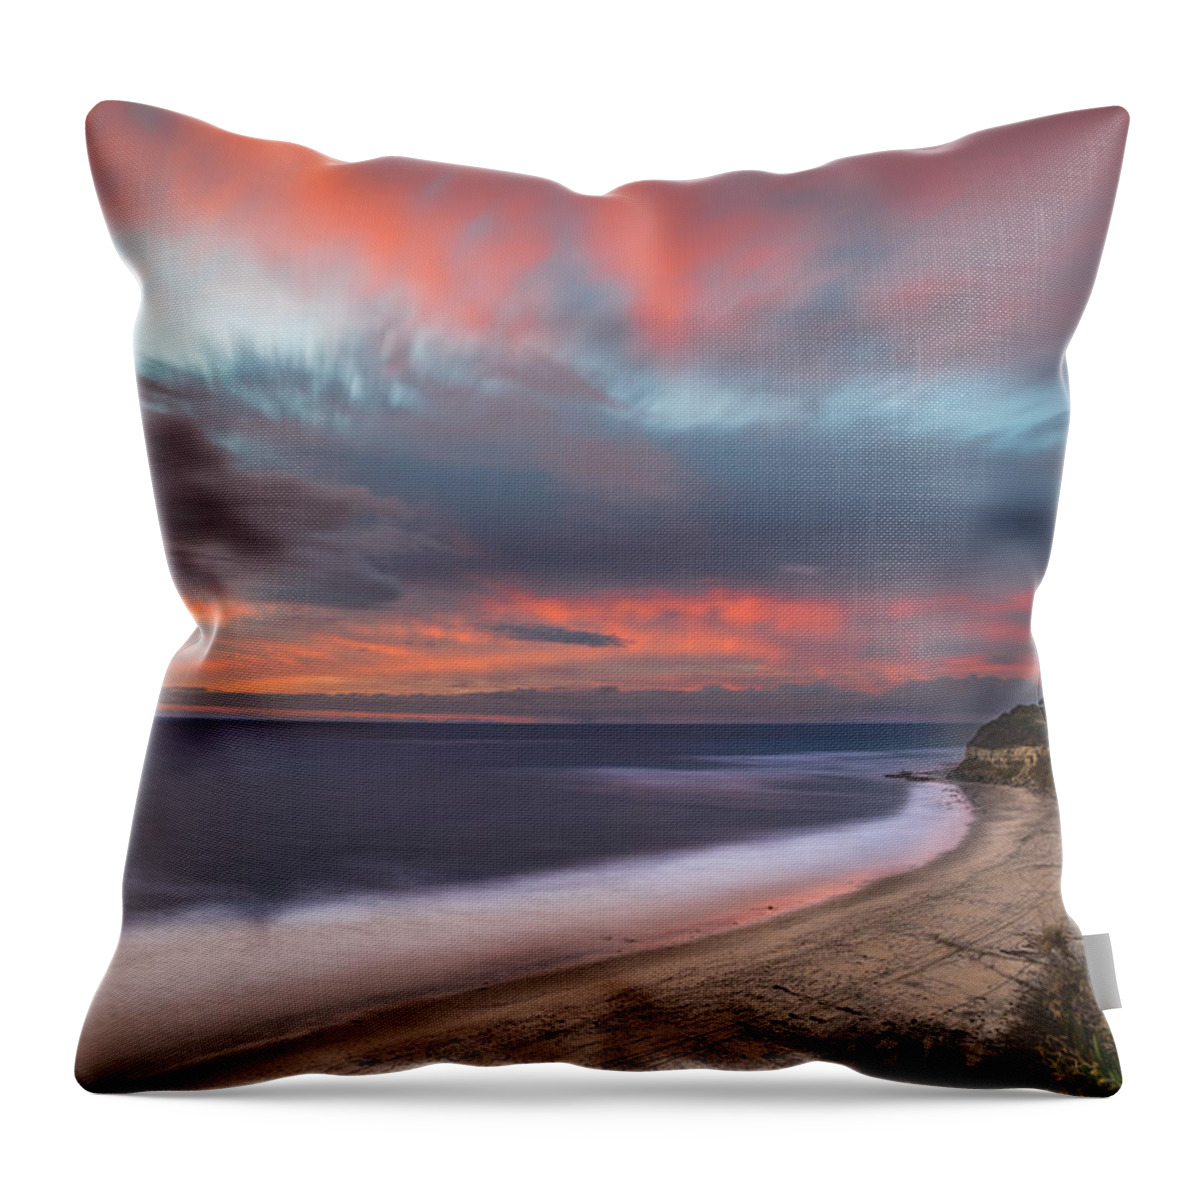 California; Long Exposure; Ocean; Reflection; San Diego; Seascape; Sky; Sunset; Surf; Sun; Clouds; Waves Throw Pillow featuring the photograph Colorful Swamis Sunset by Larry Marshall